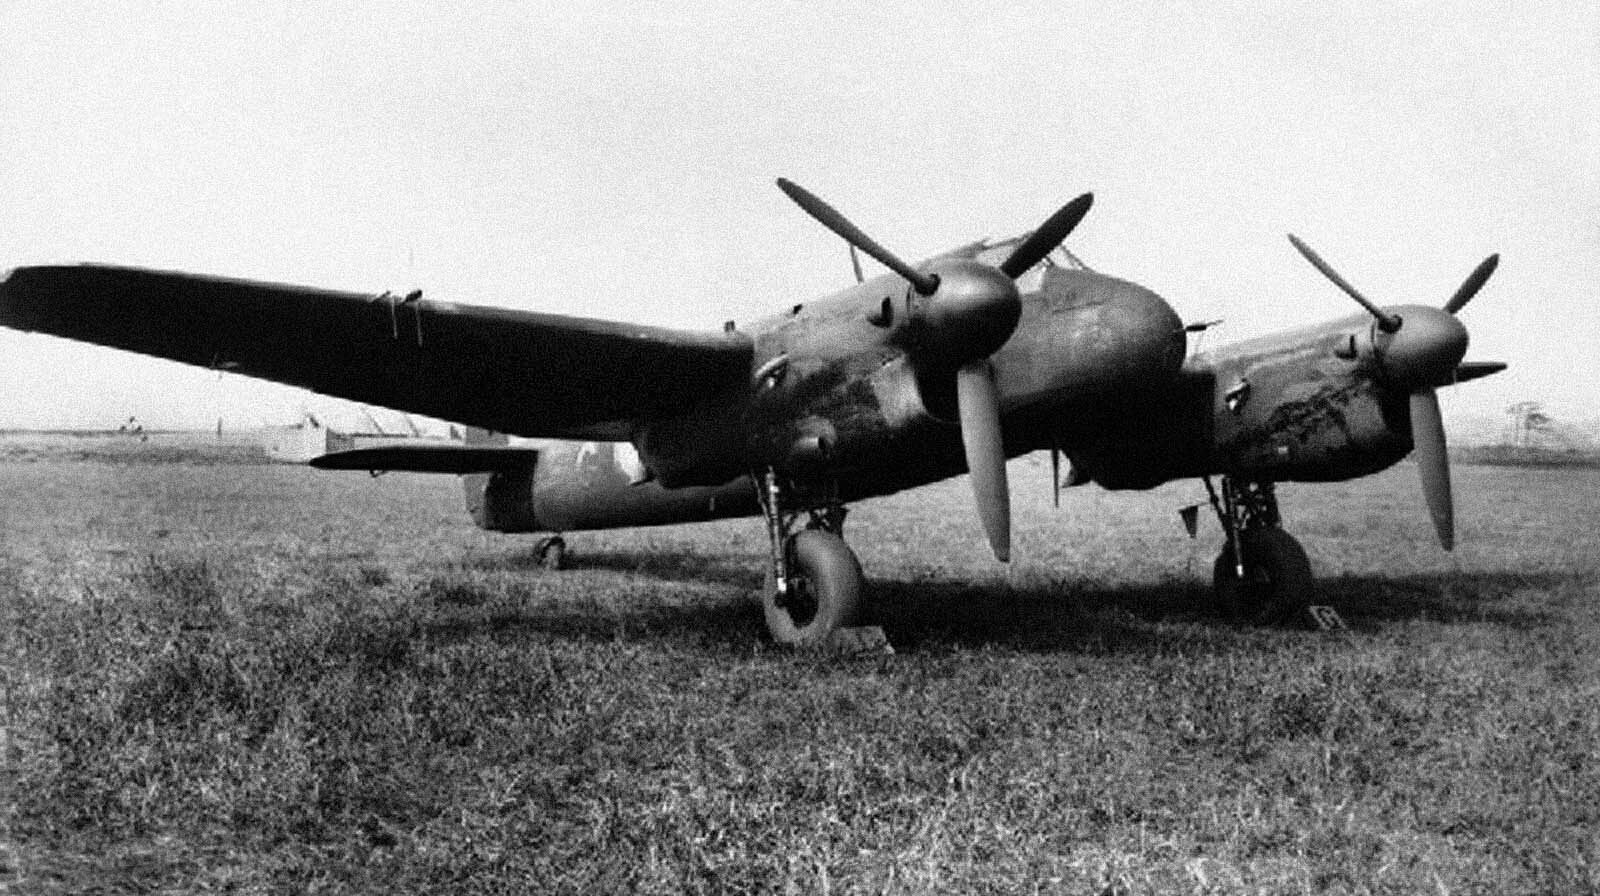 This Bristol Beaufighter is equipped with the RAF Mark IV airborne interception (AI) radar. Mark IV AI radar was introduced in June 1940 and could identify potential targets aloft from 450 feet to 10,000 feet. 